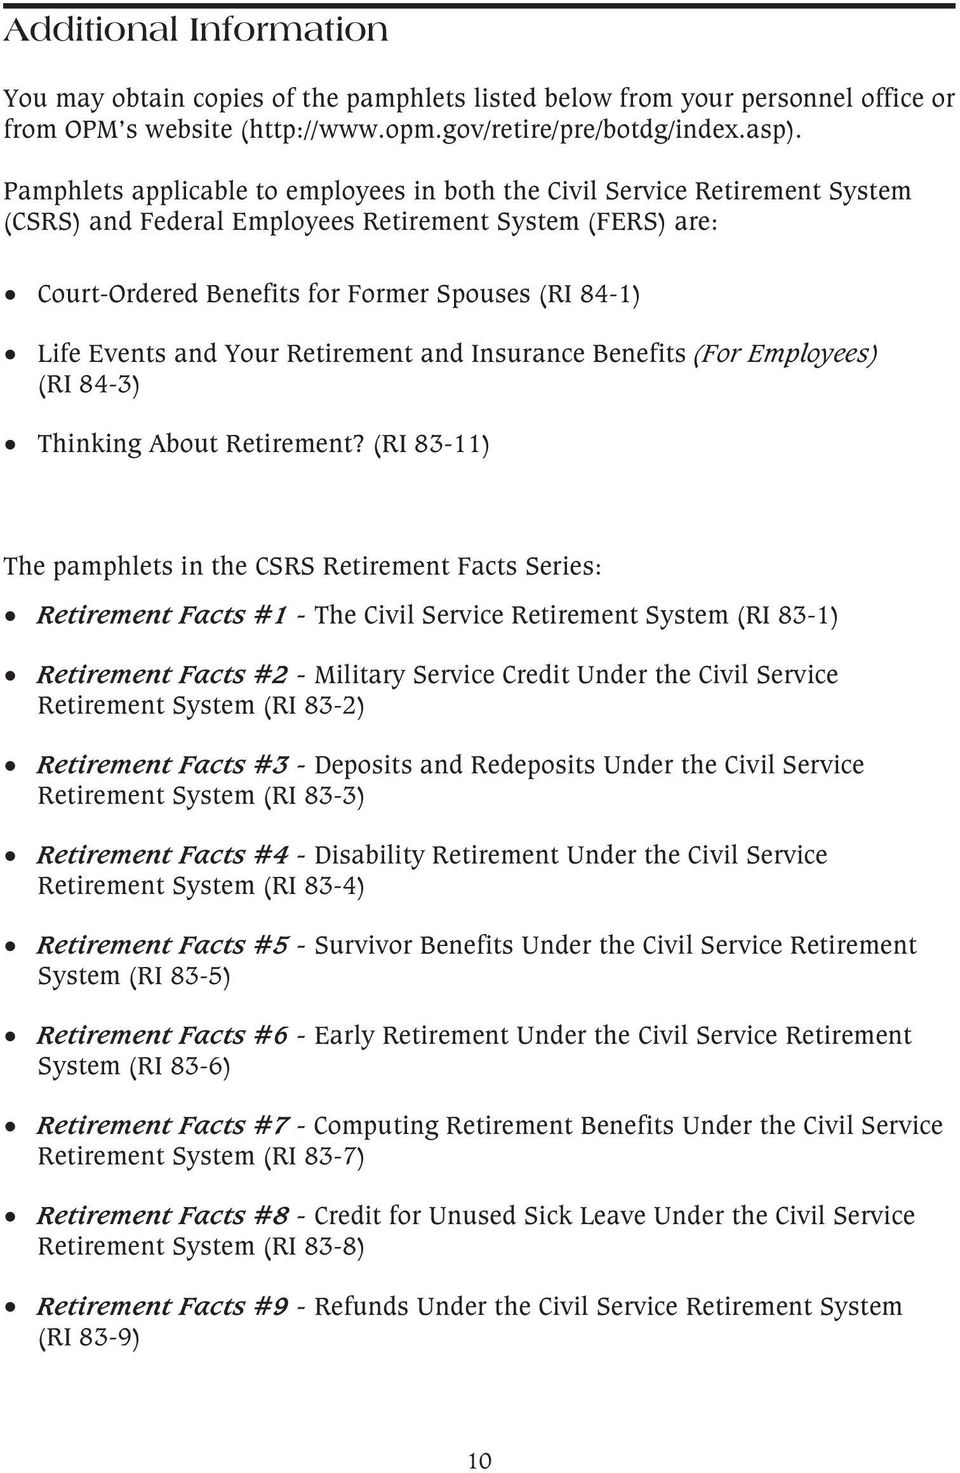 Events and Your Retirement and Insurance Benefits (For Employees) (RI 84-3) Thinking About Retirement?